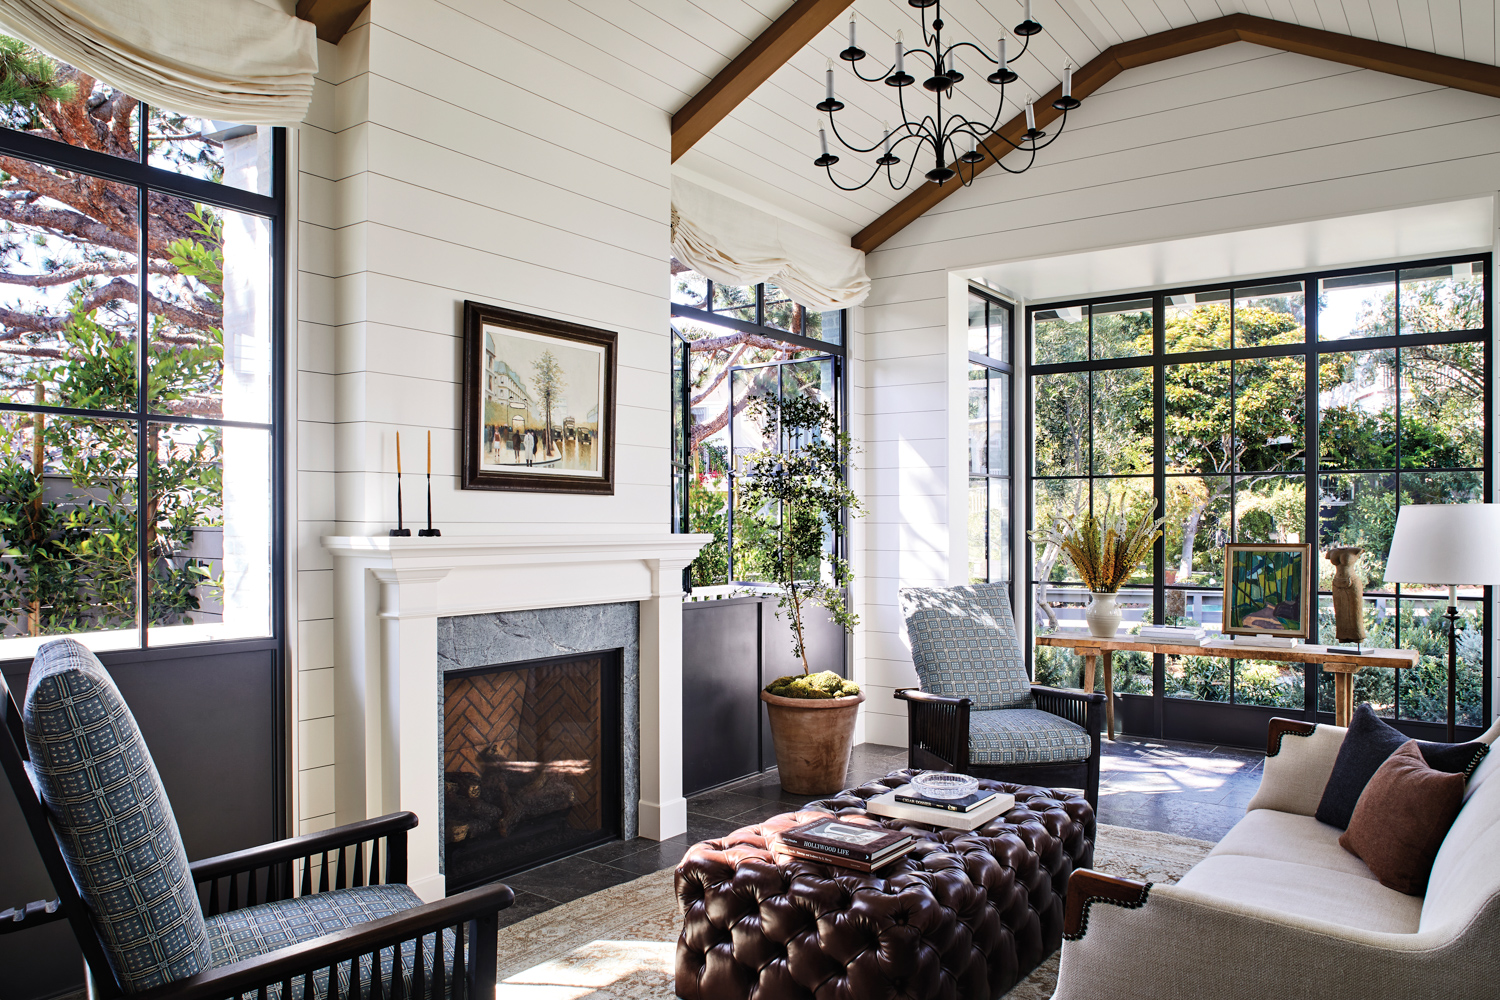 Living room with modern farmhouse decor like white paneled walls, steel-framed windows and a leather ottoman